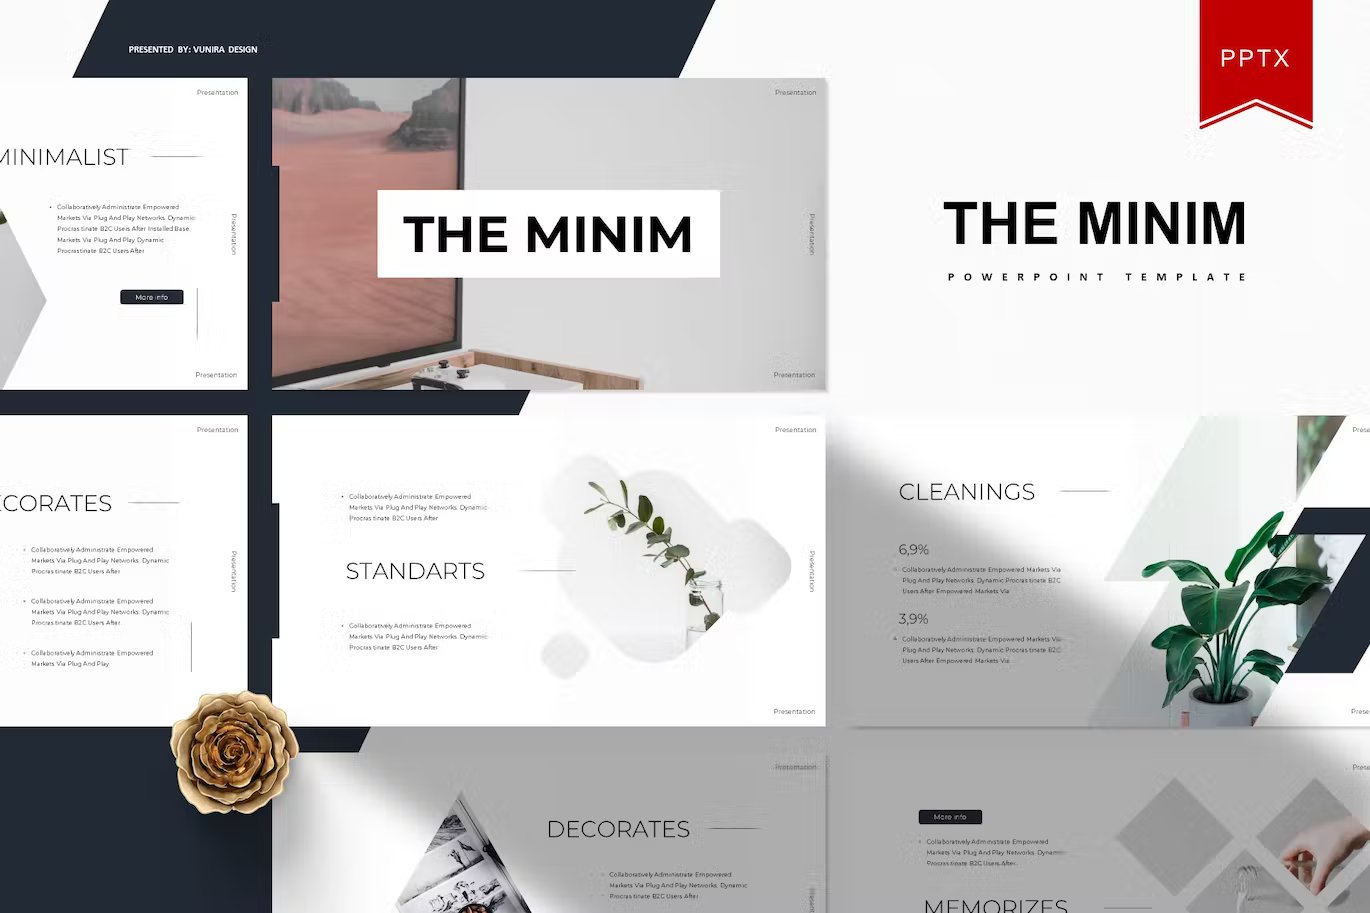 Black lettering "The Minim Powerpoint Template" and different templates on a gray background.